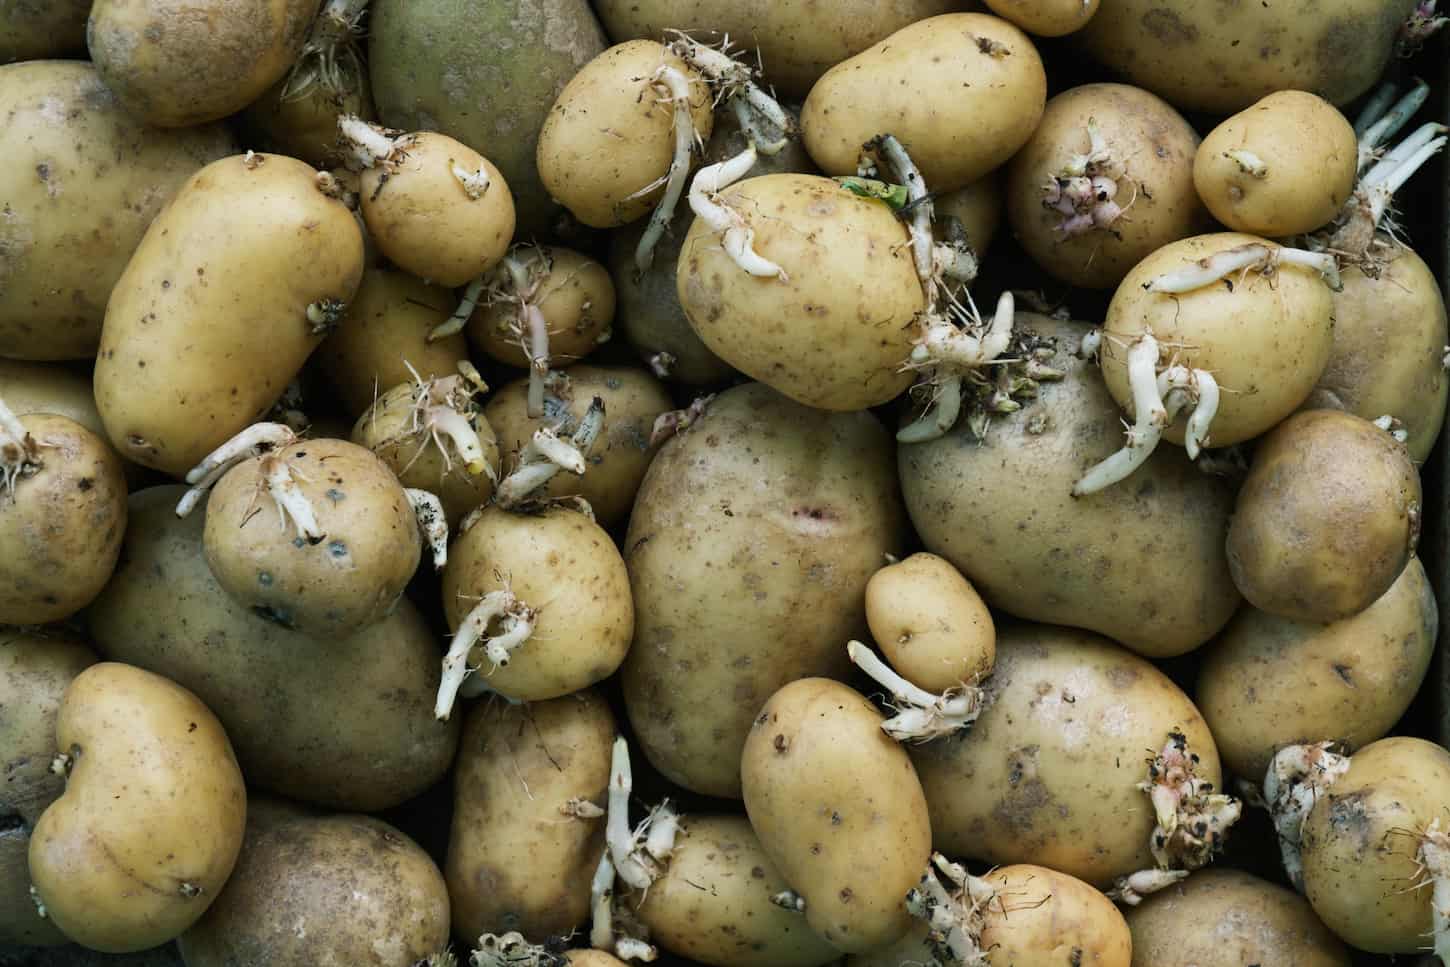 An image of old sprouted potatoes.